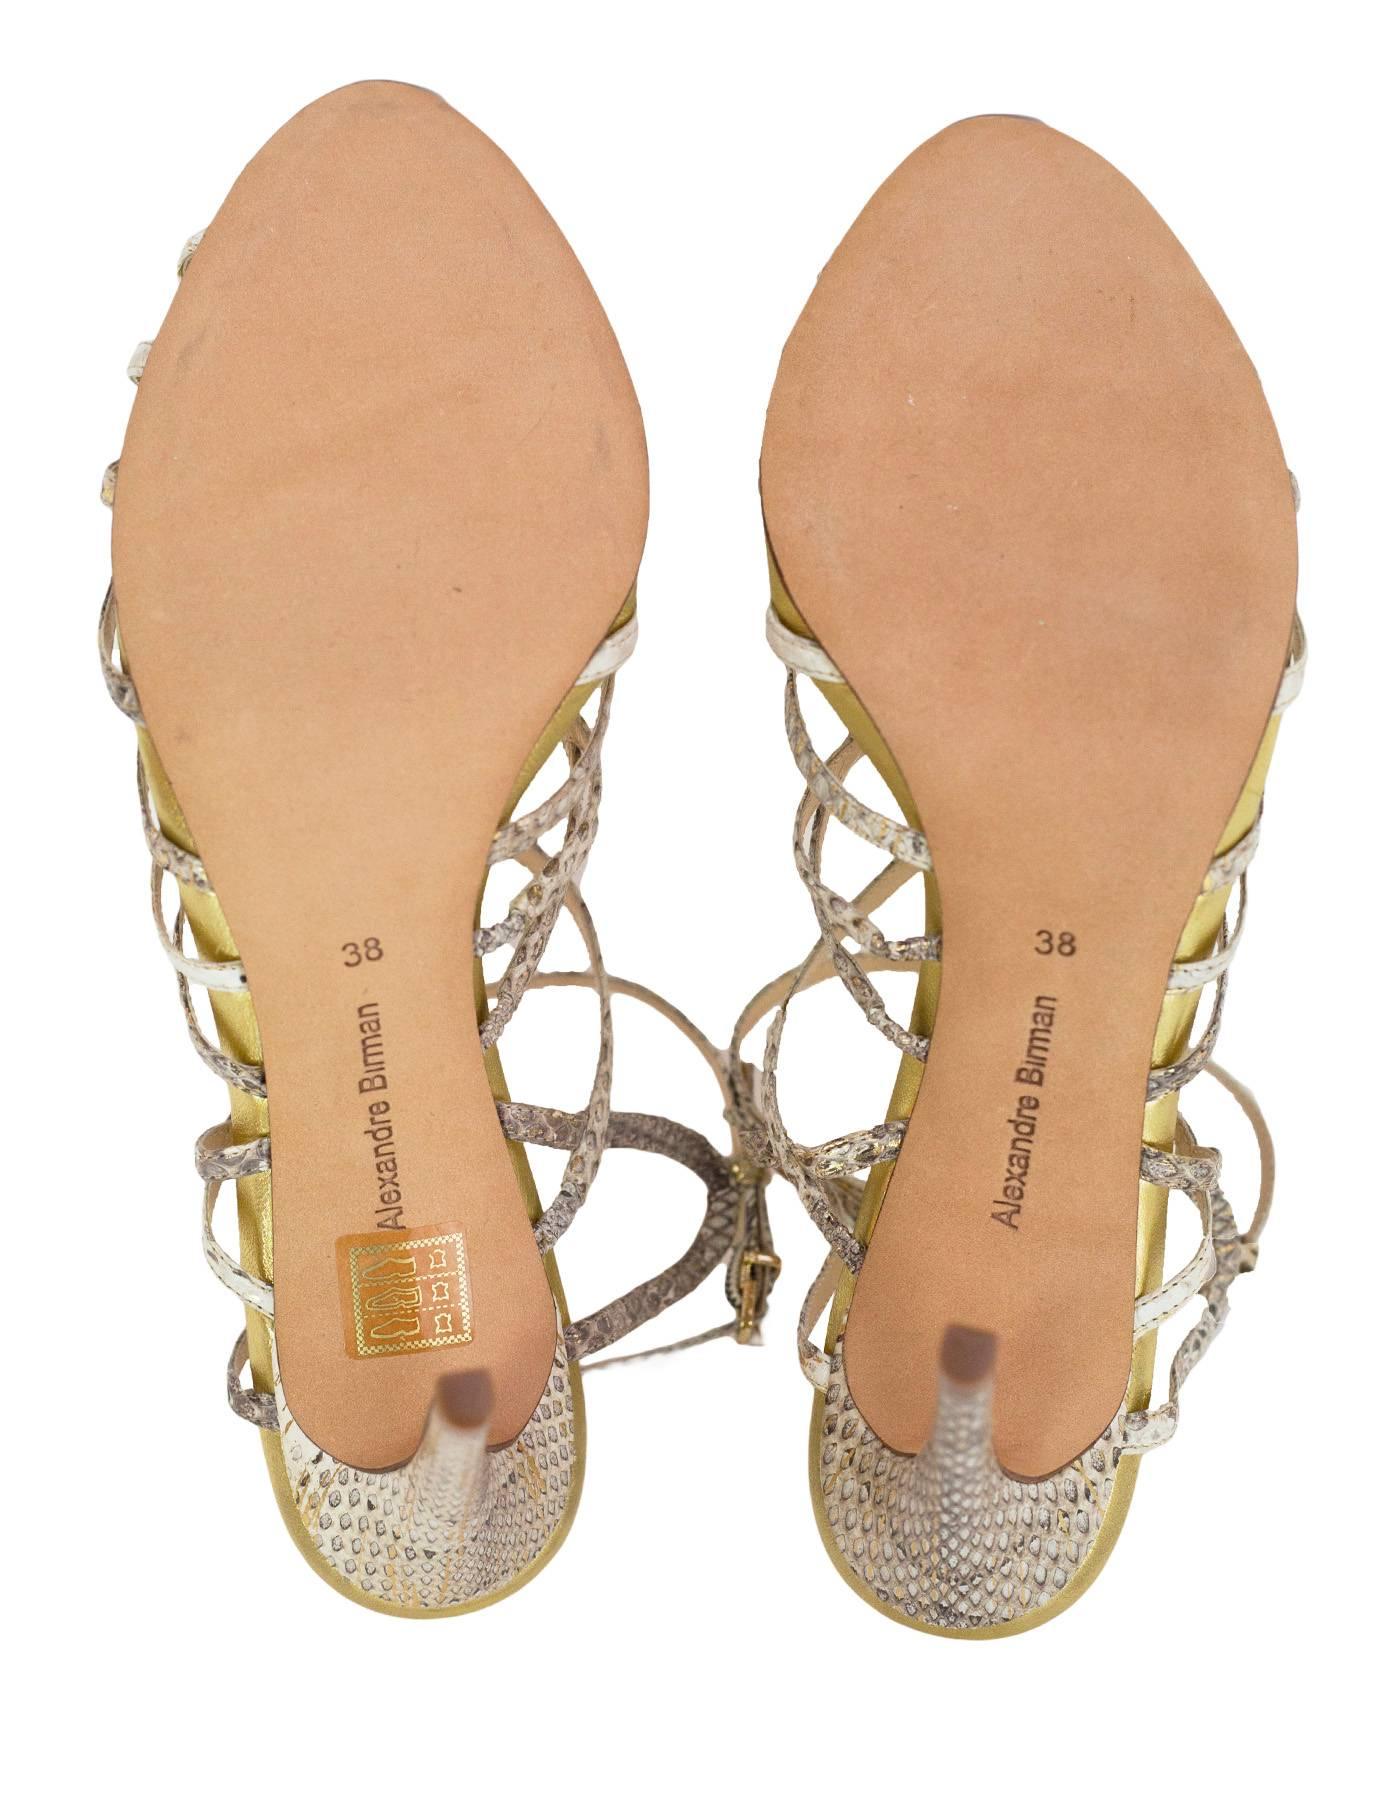 Alexandre Birman Gold and Beige Python Snakeskin Caged Sandals Sz 38 In Excellent Condition In New York, NY